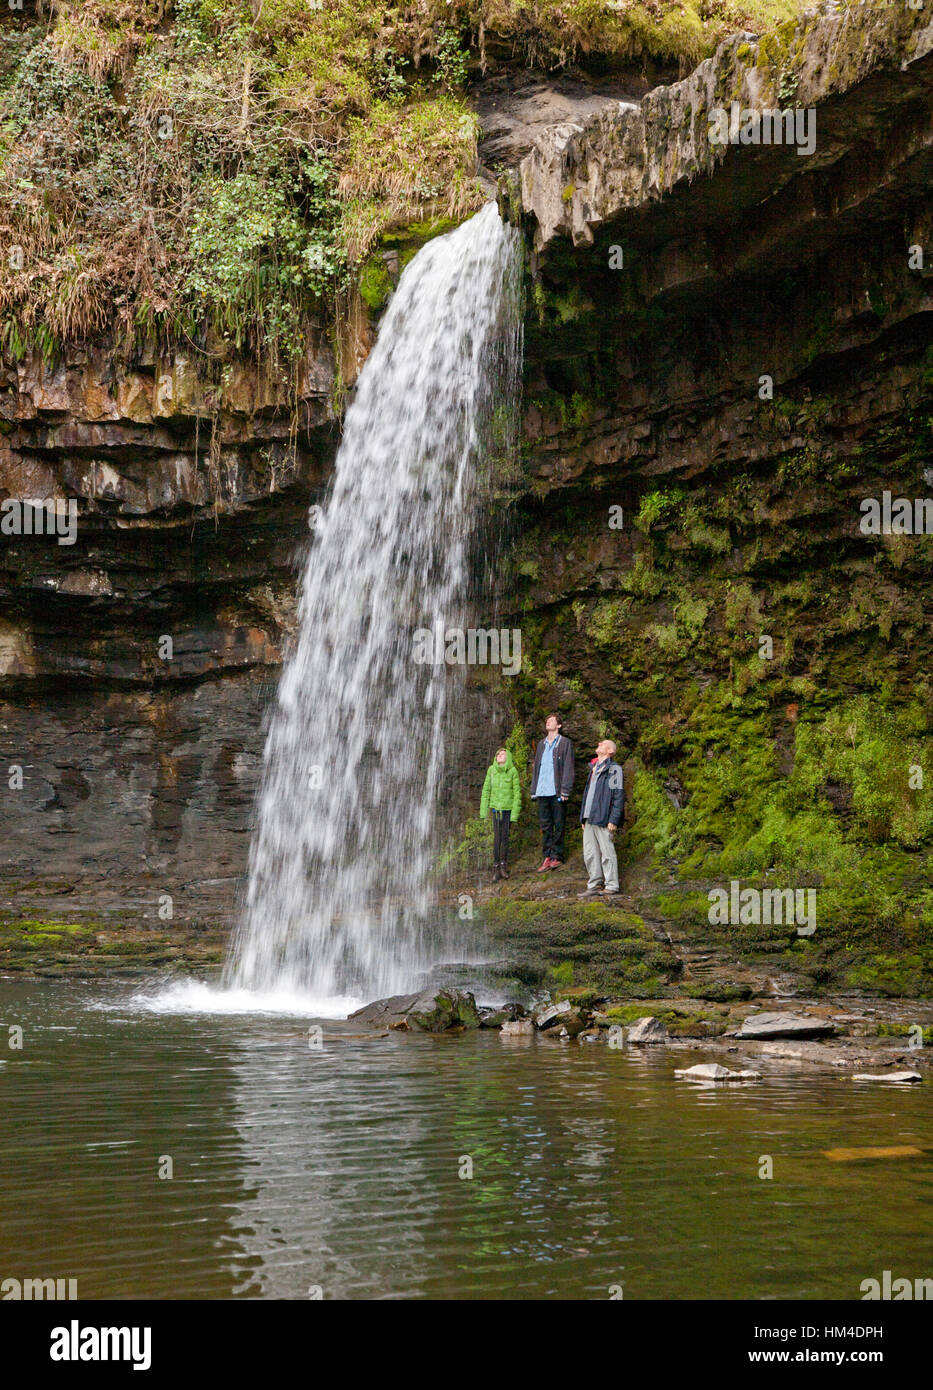 Walkers stand behind the Sgwd Gwladus waterfall near Ystradfellte in the Brecons, Wales. Stock Photo